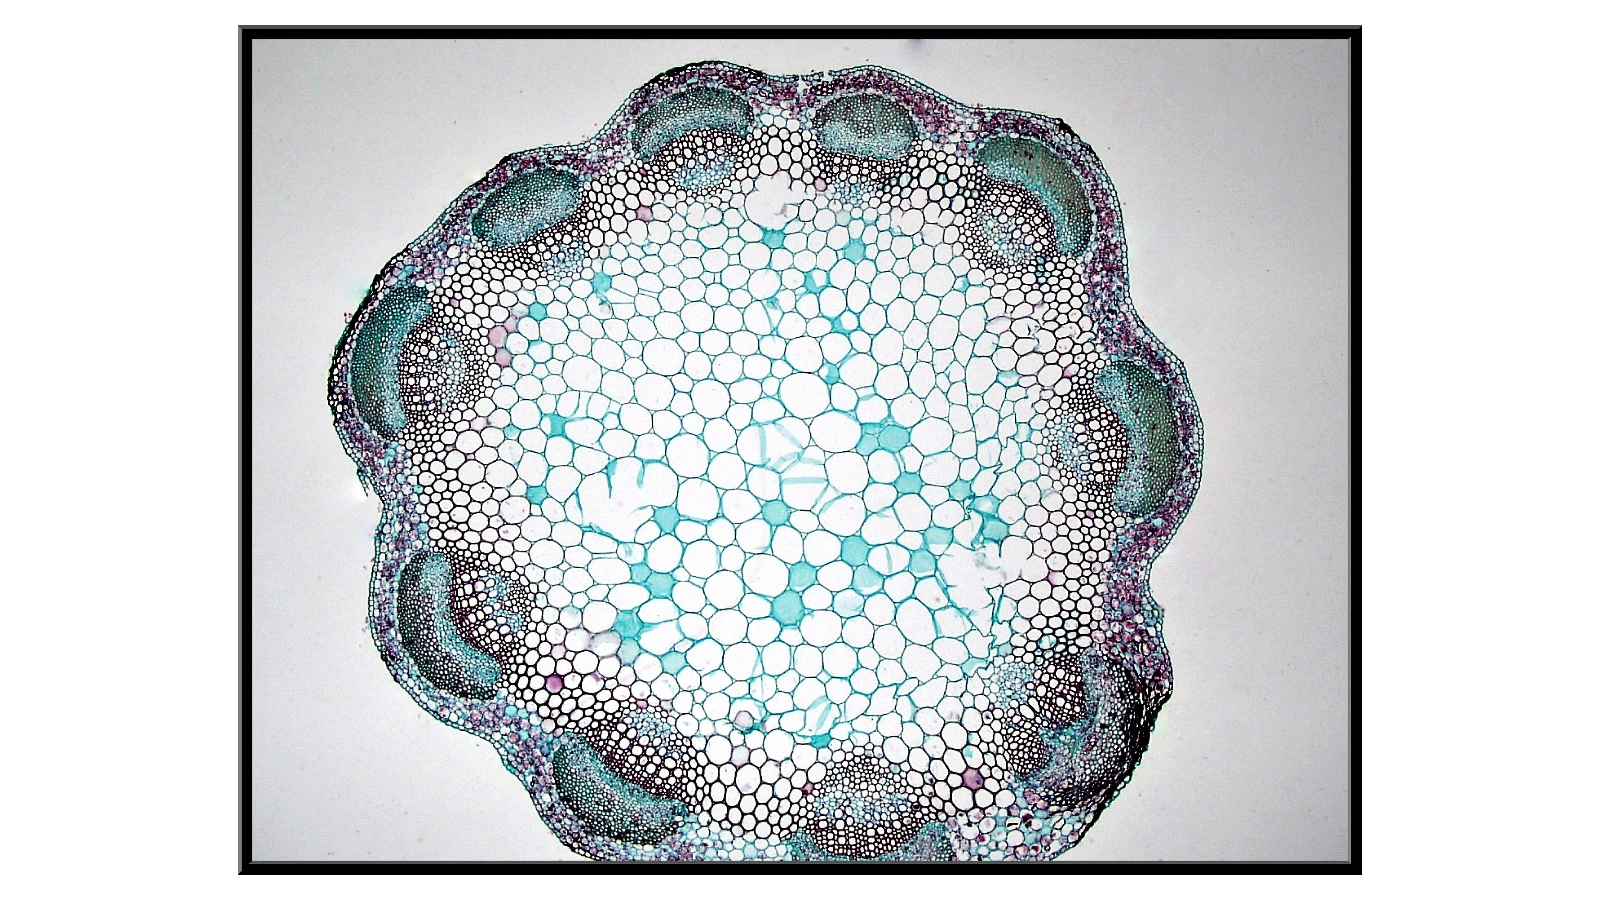 Cross-section of a clover stem